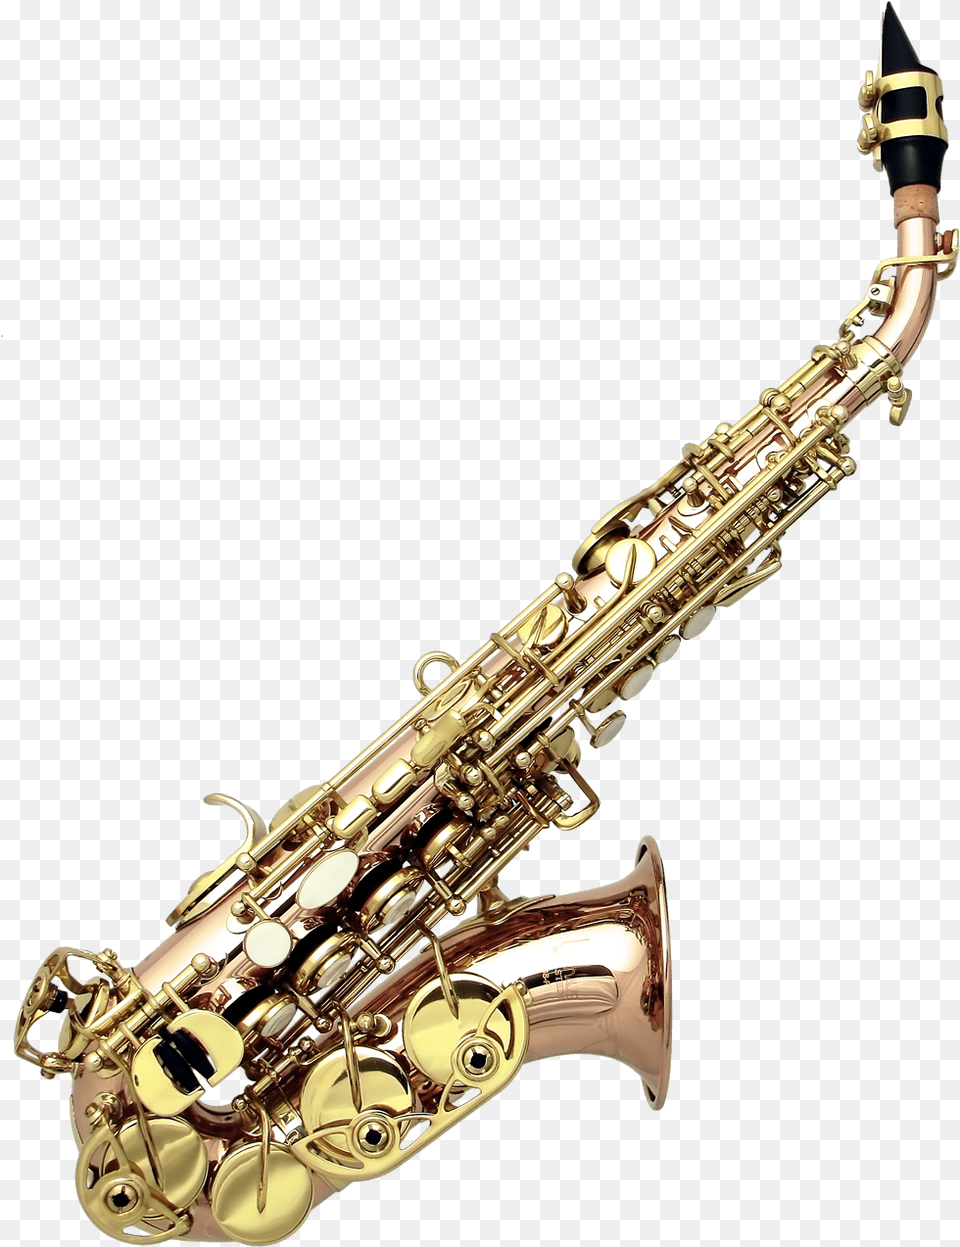 Yamaha Curved Soprano Saxophone Download, Musical Instrument Png Image